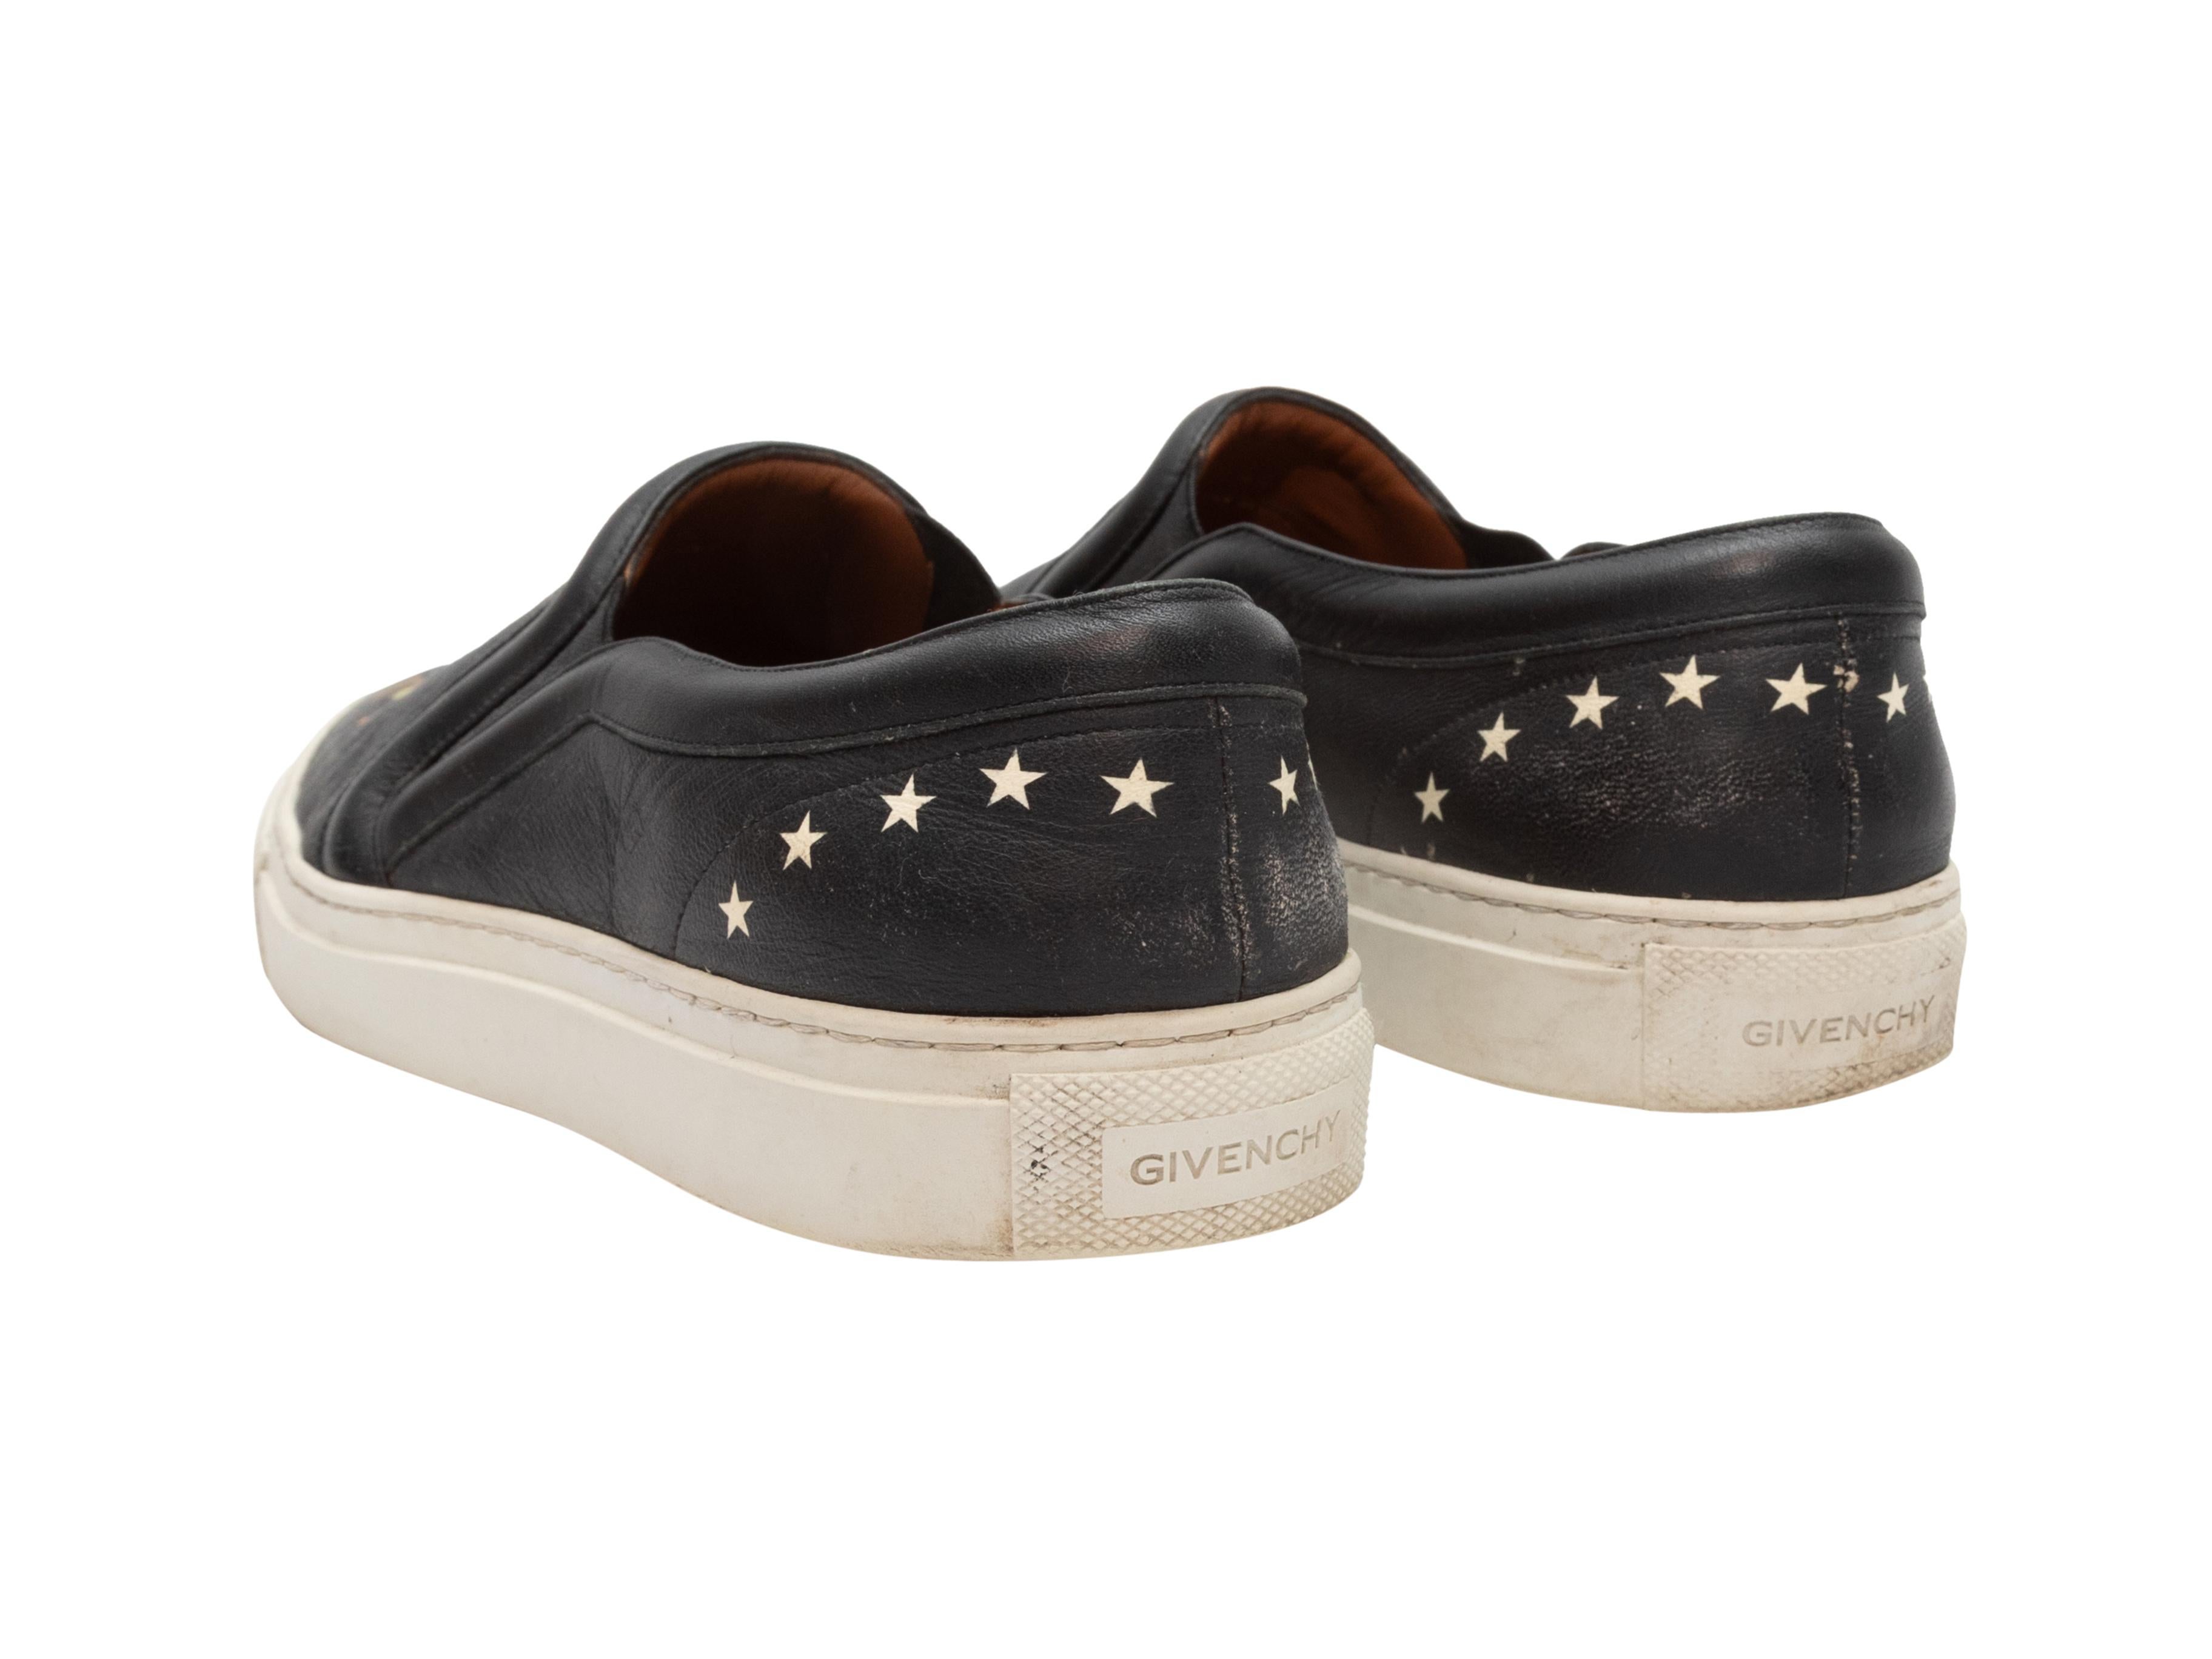 Black and multicolor Rottweiler dog print leather slip-on low-top sneakers by Givenchy. Rubber soles. 1